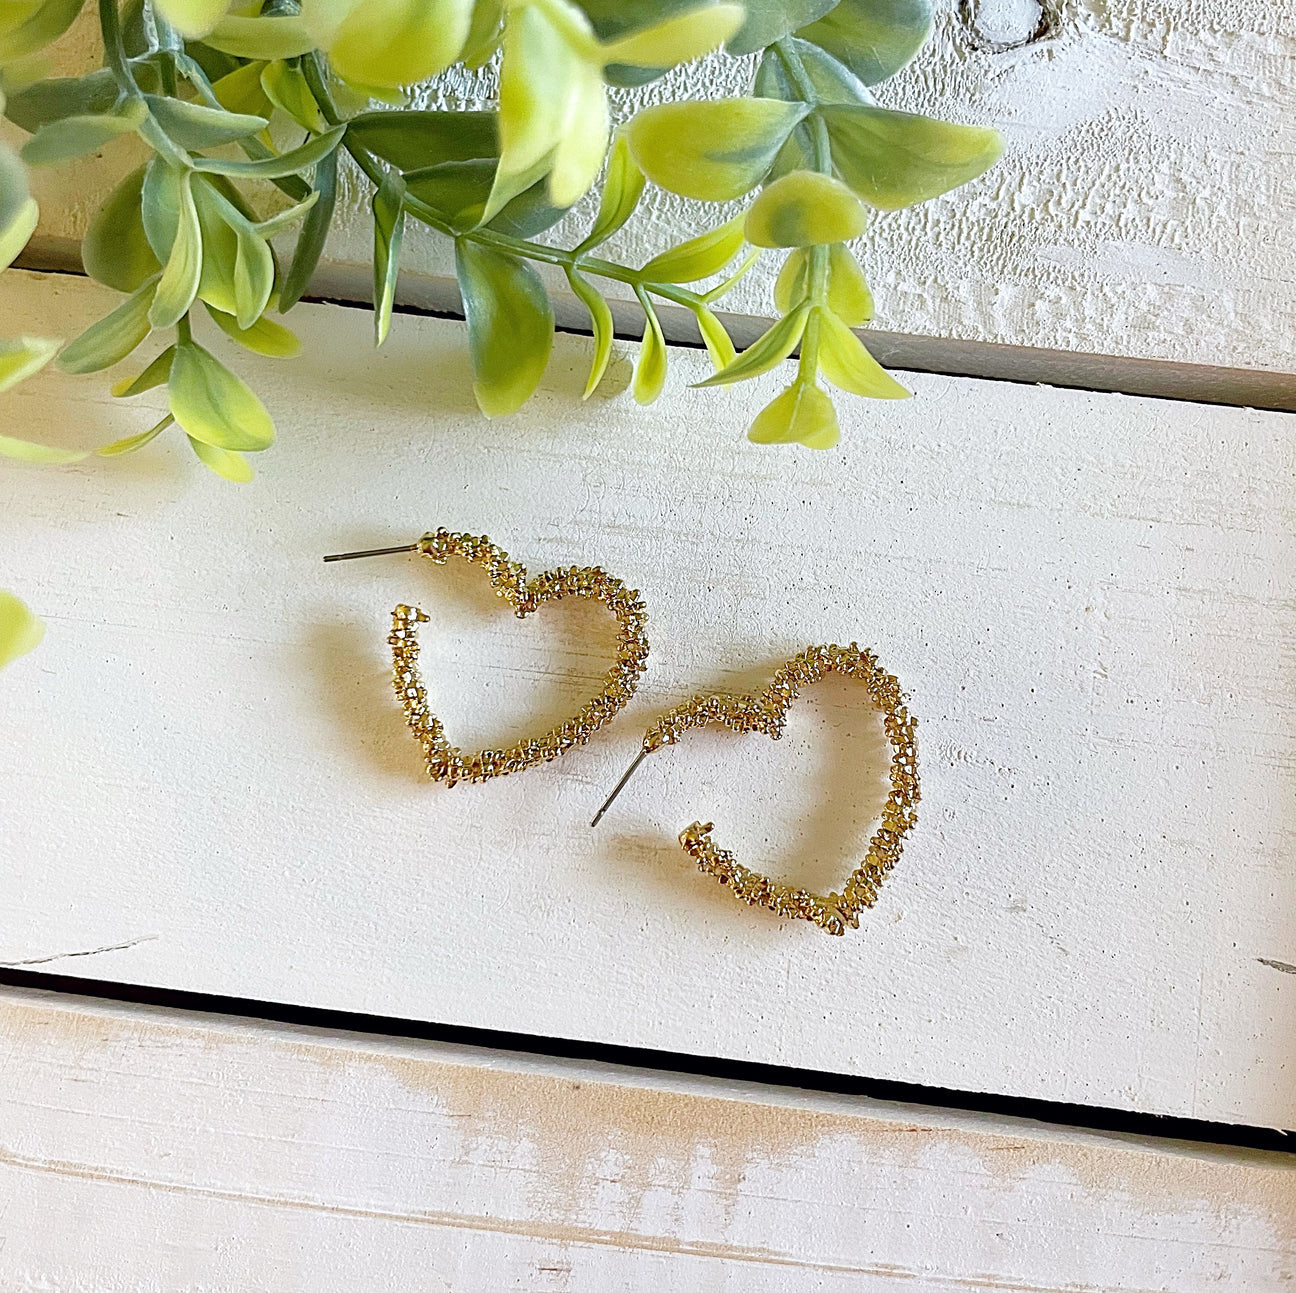 Ansley Heart Hoop Earrings in Gold • Impressions Online Boutique